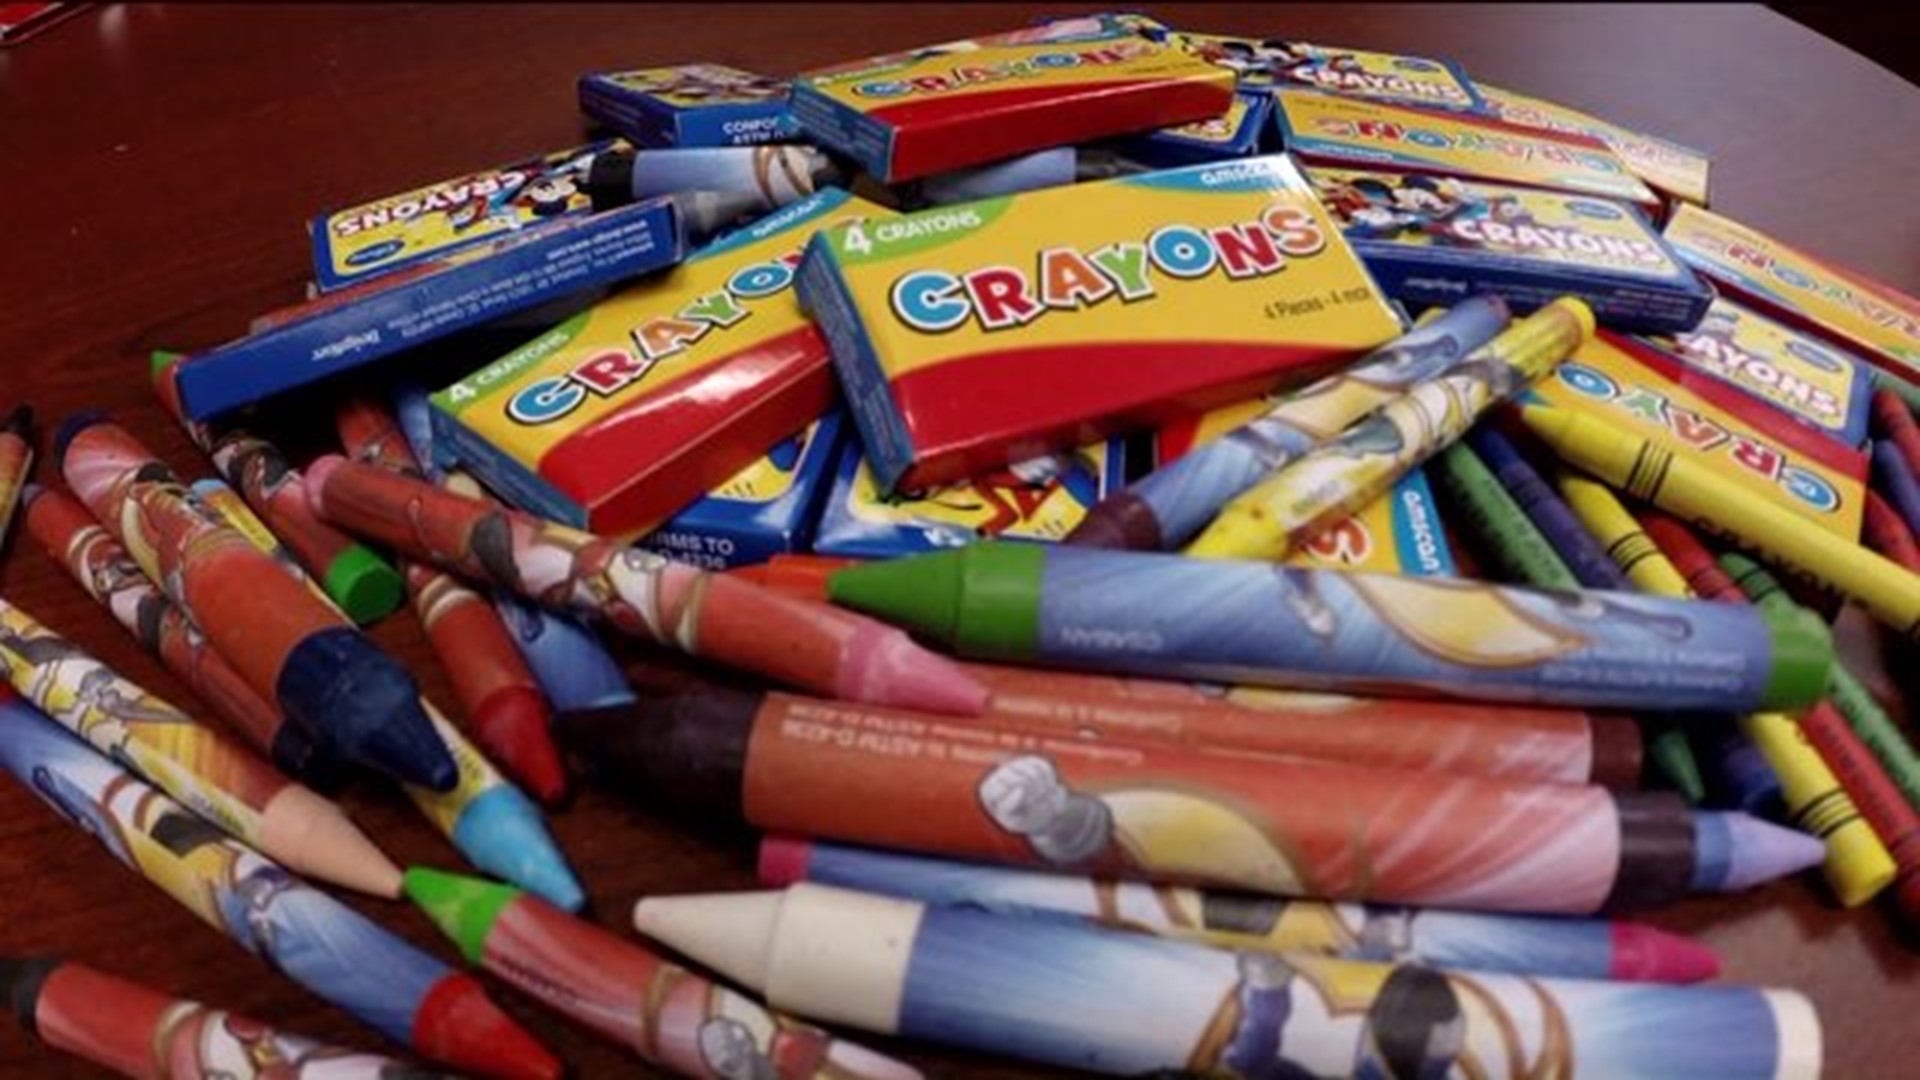 Are crayons injuring our children?